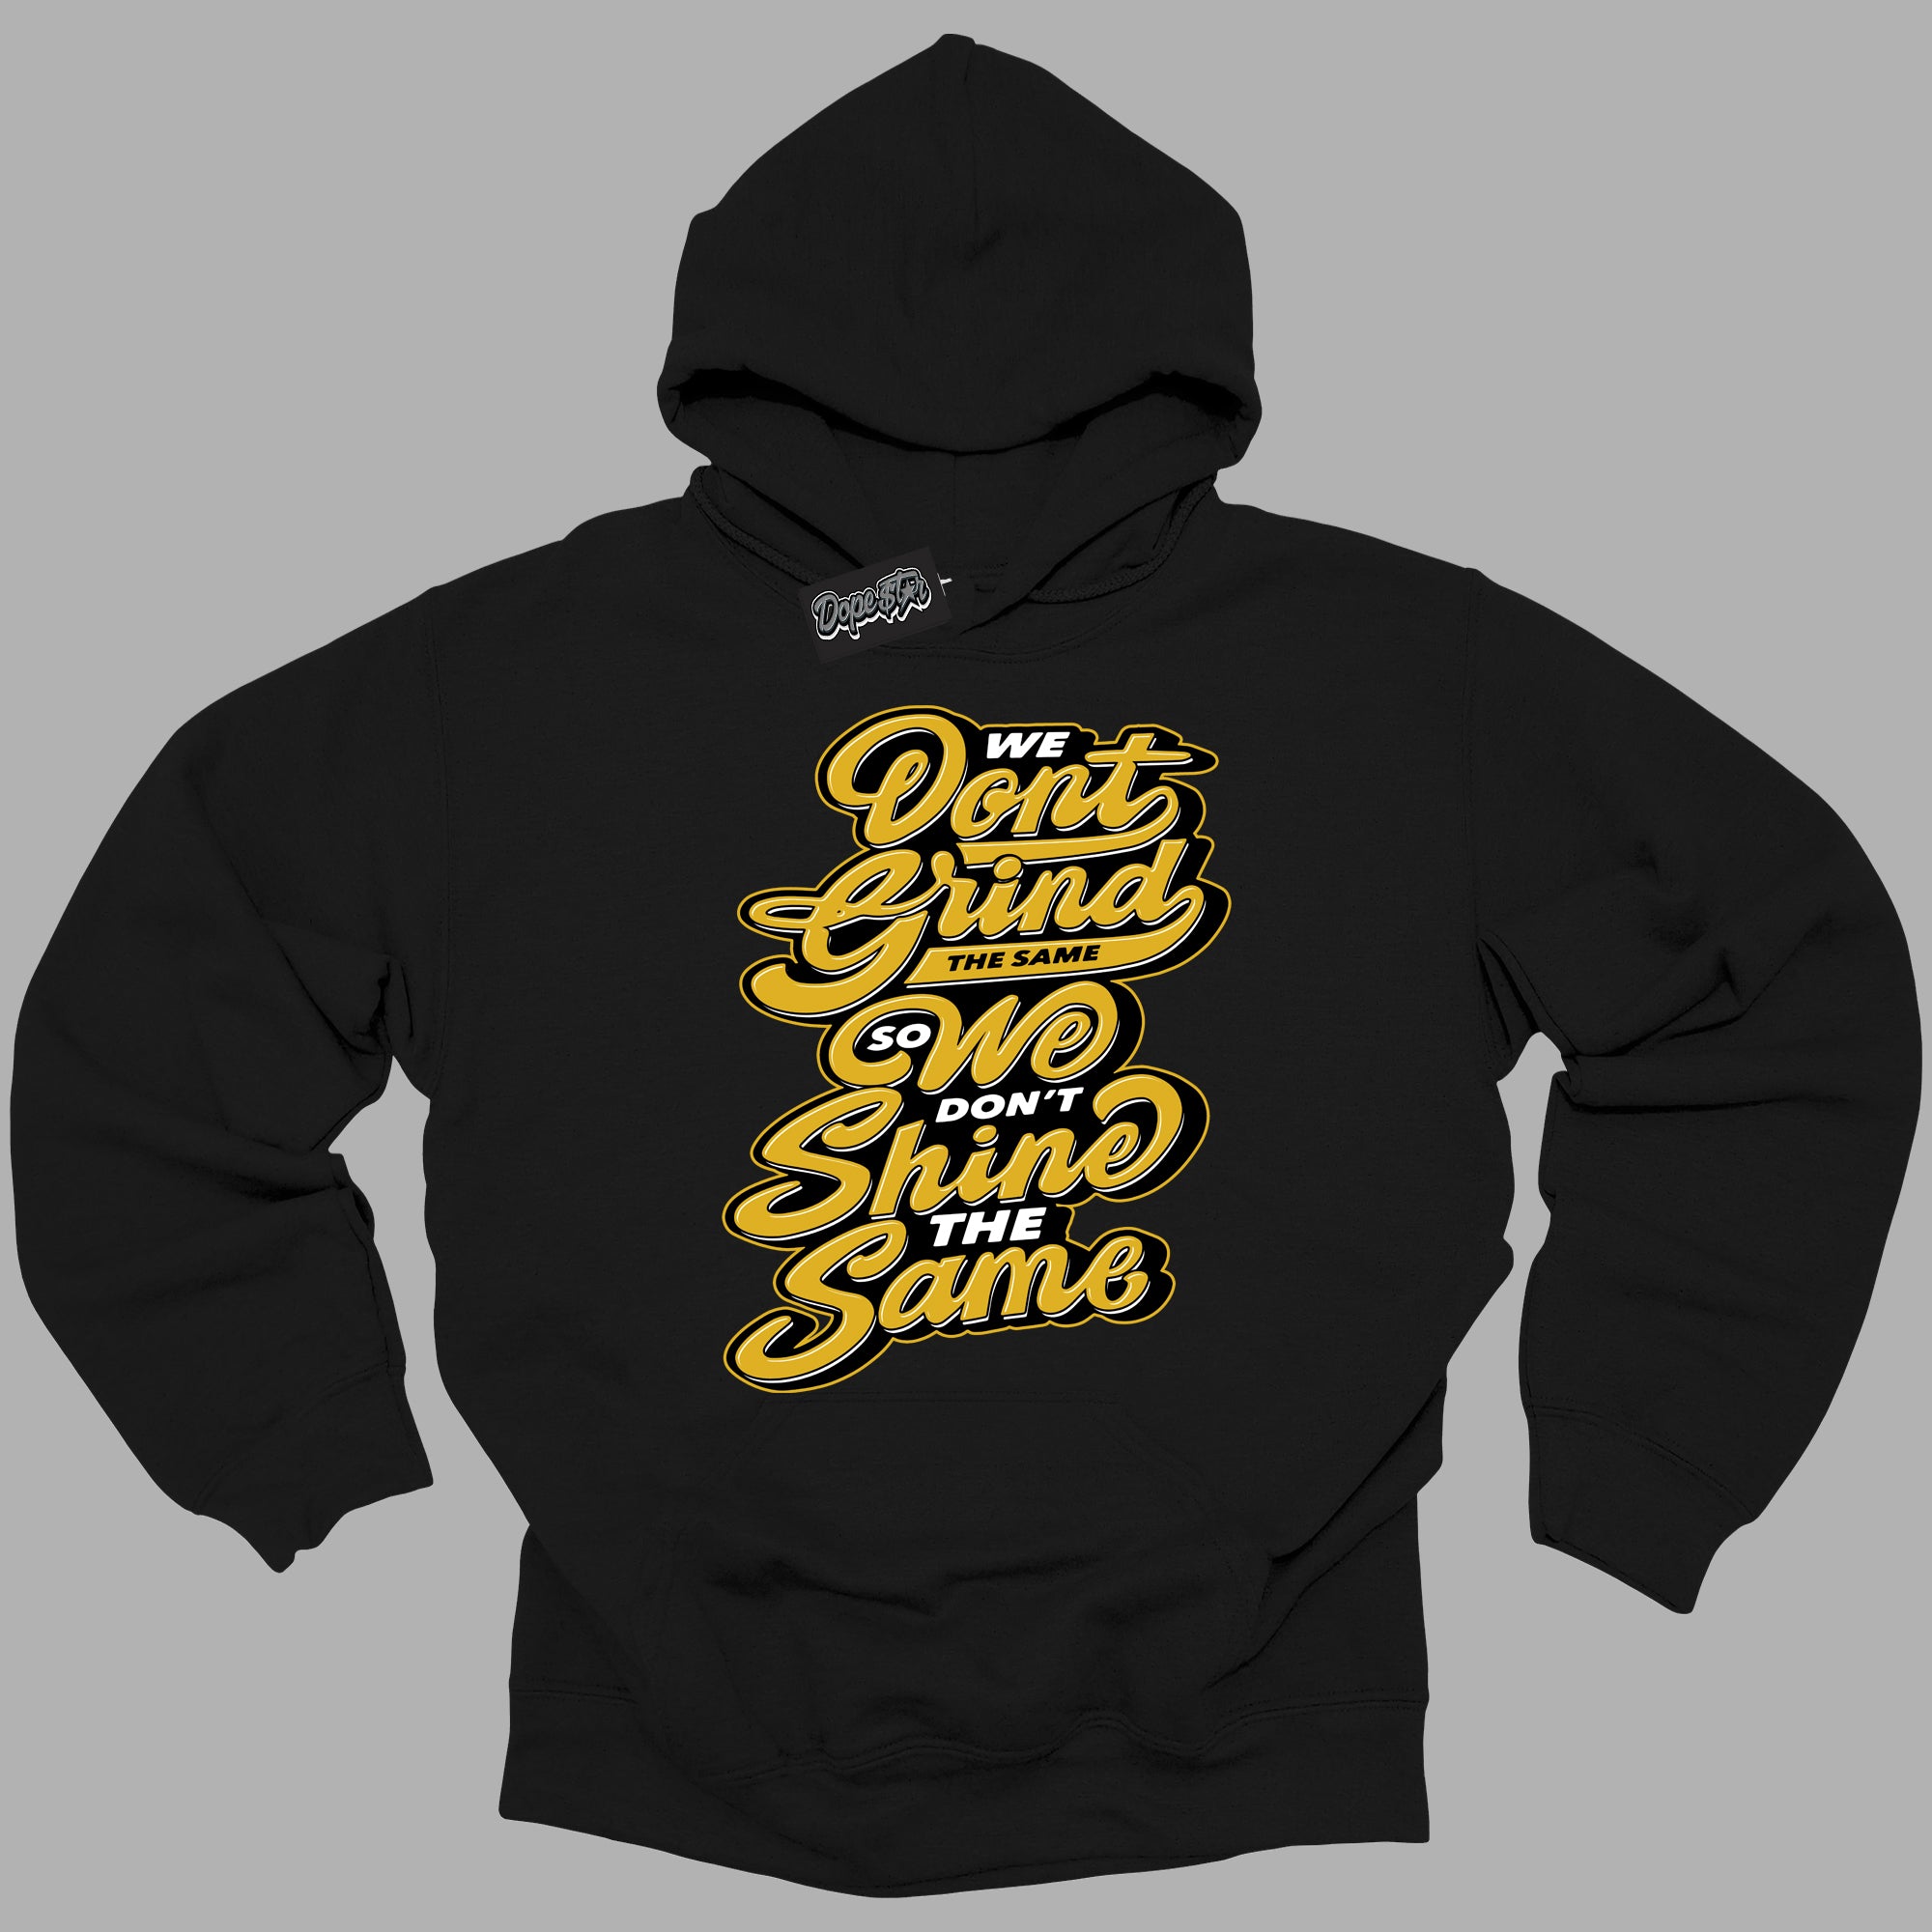 Cool Black Hoodie with “ Grind Shine ”  design that Perfectly Matches Yellow Ochre 6s Sneakers.